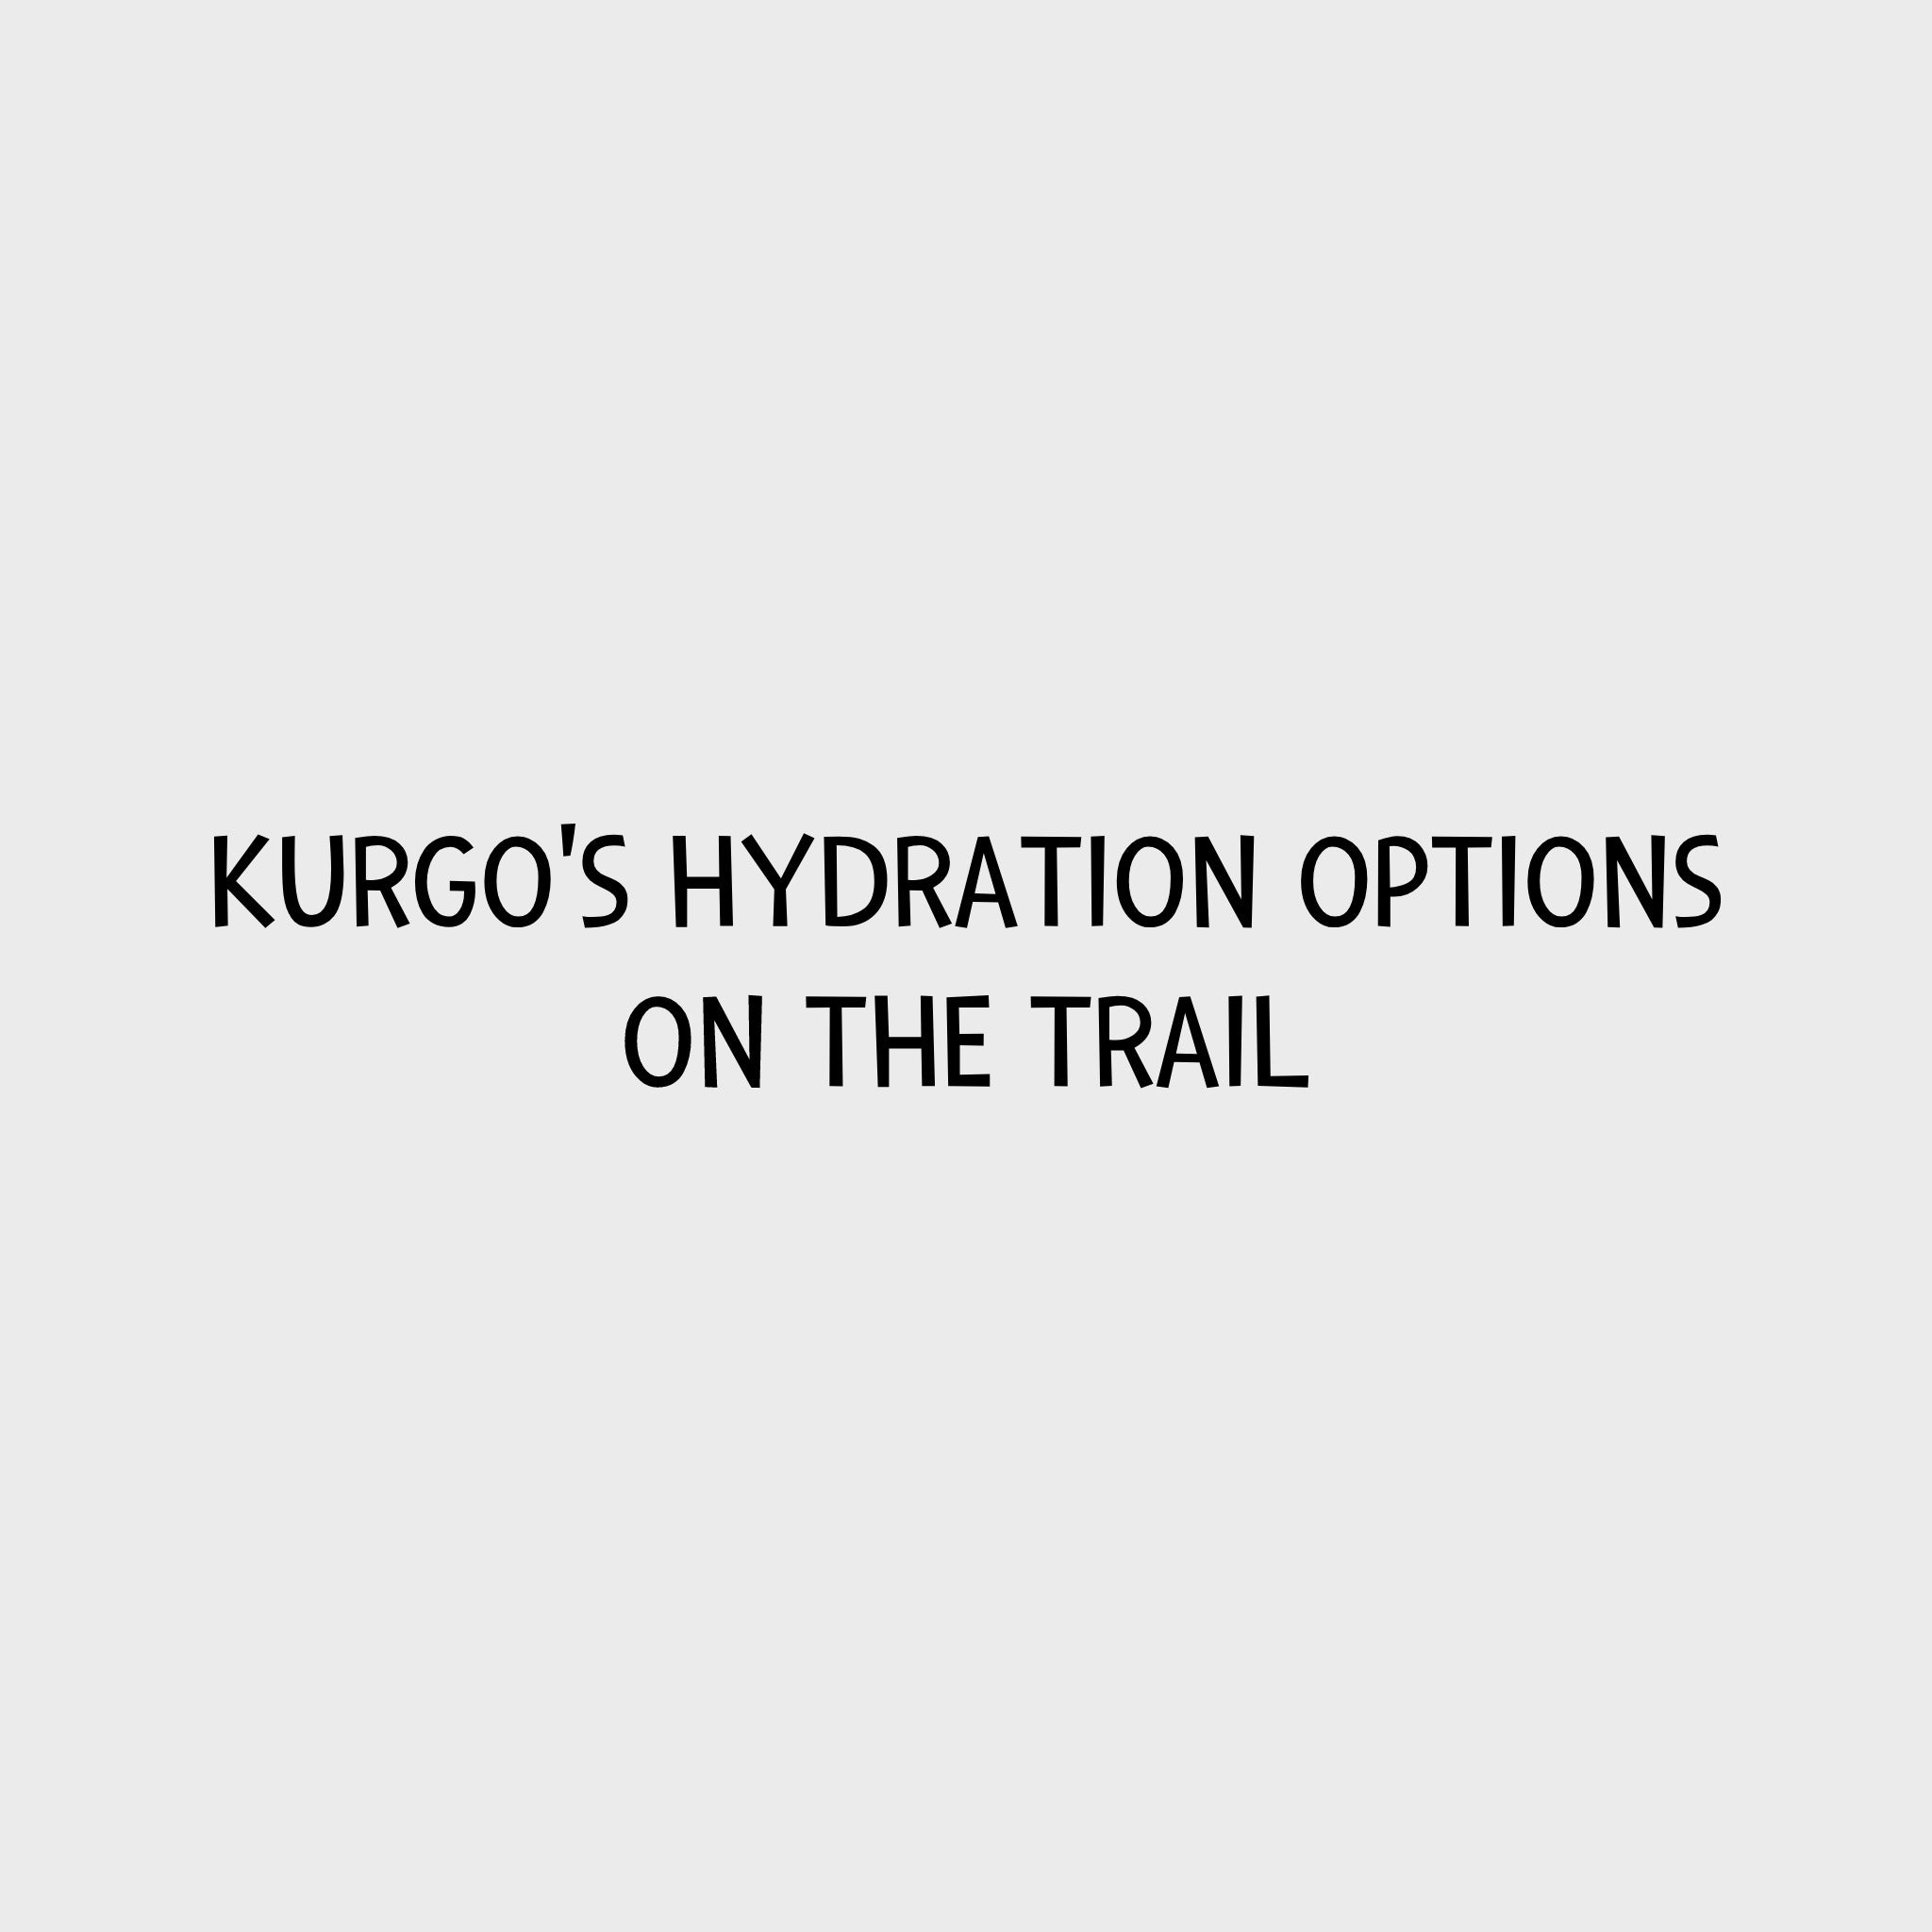 Video - Kurgo's hydration options on the trail